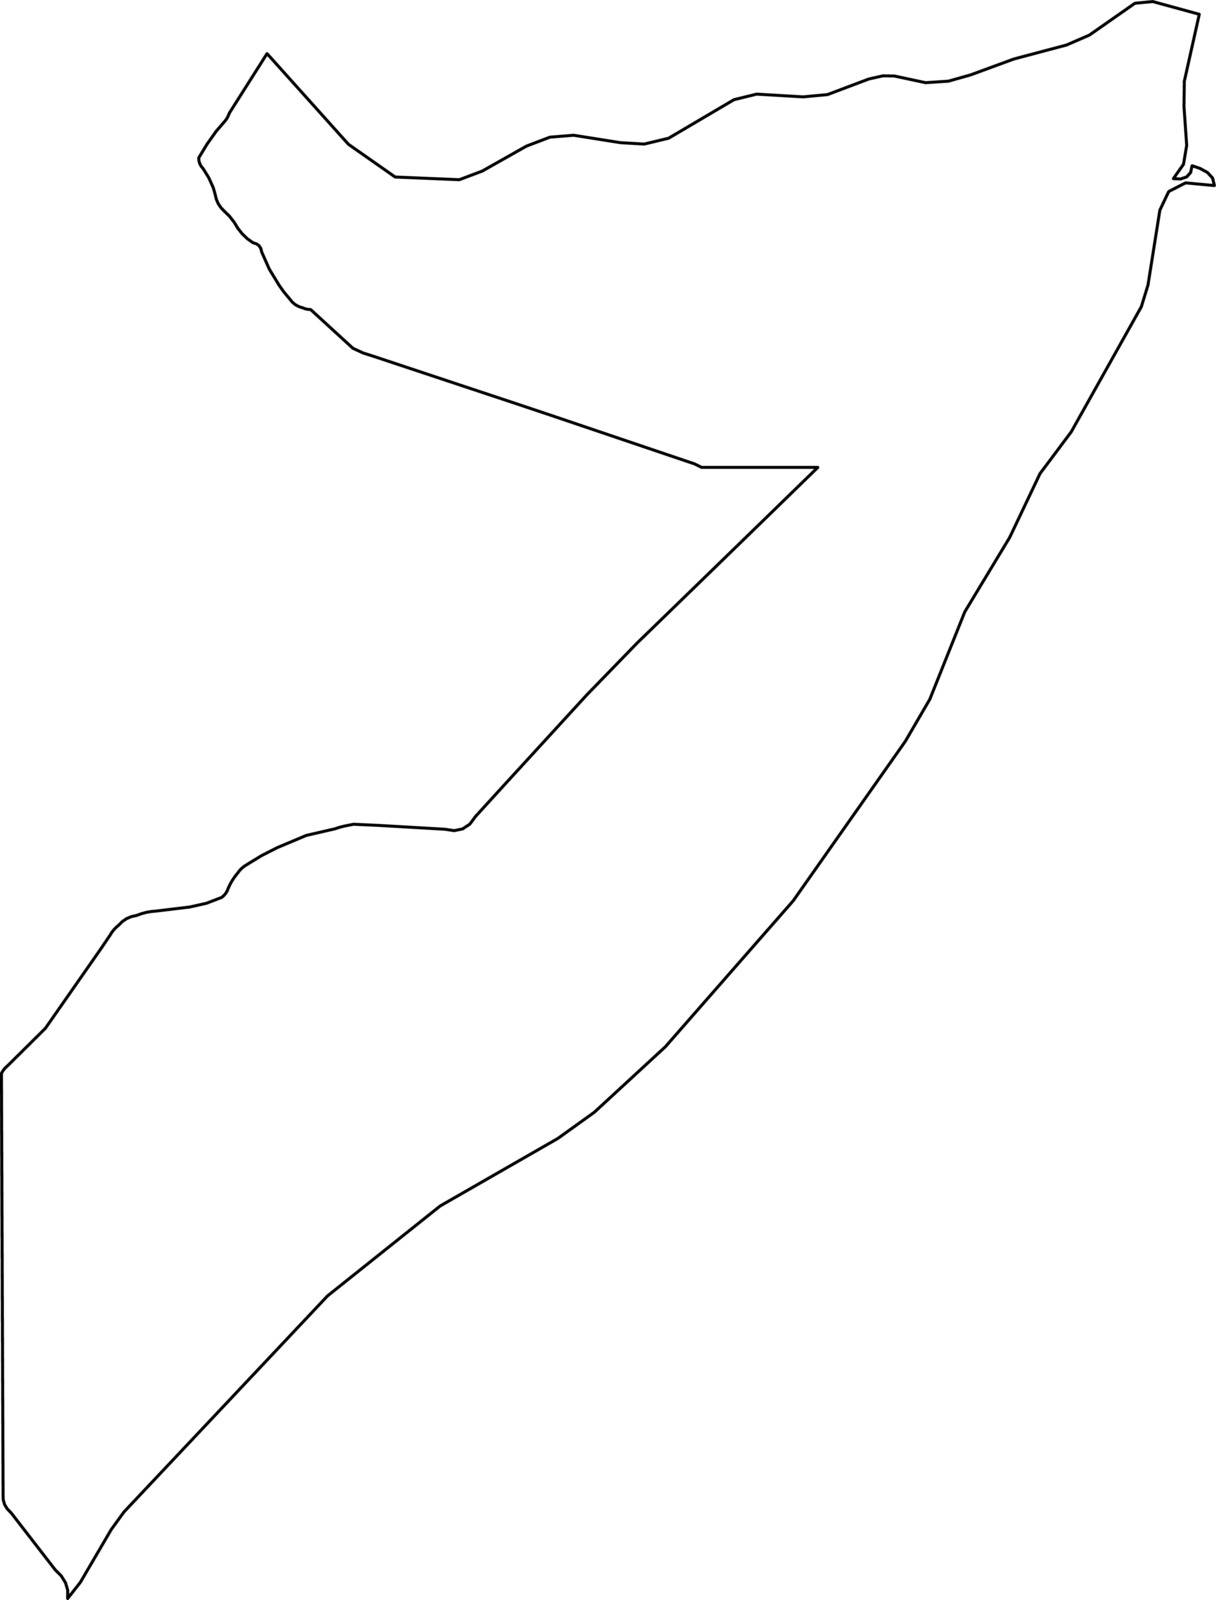 Somalia - solid black outline border map of country area. Simple flat vector illustration.